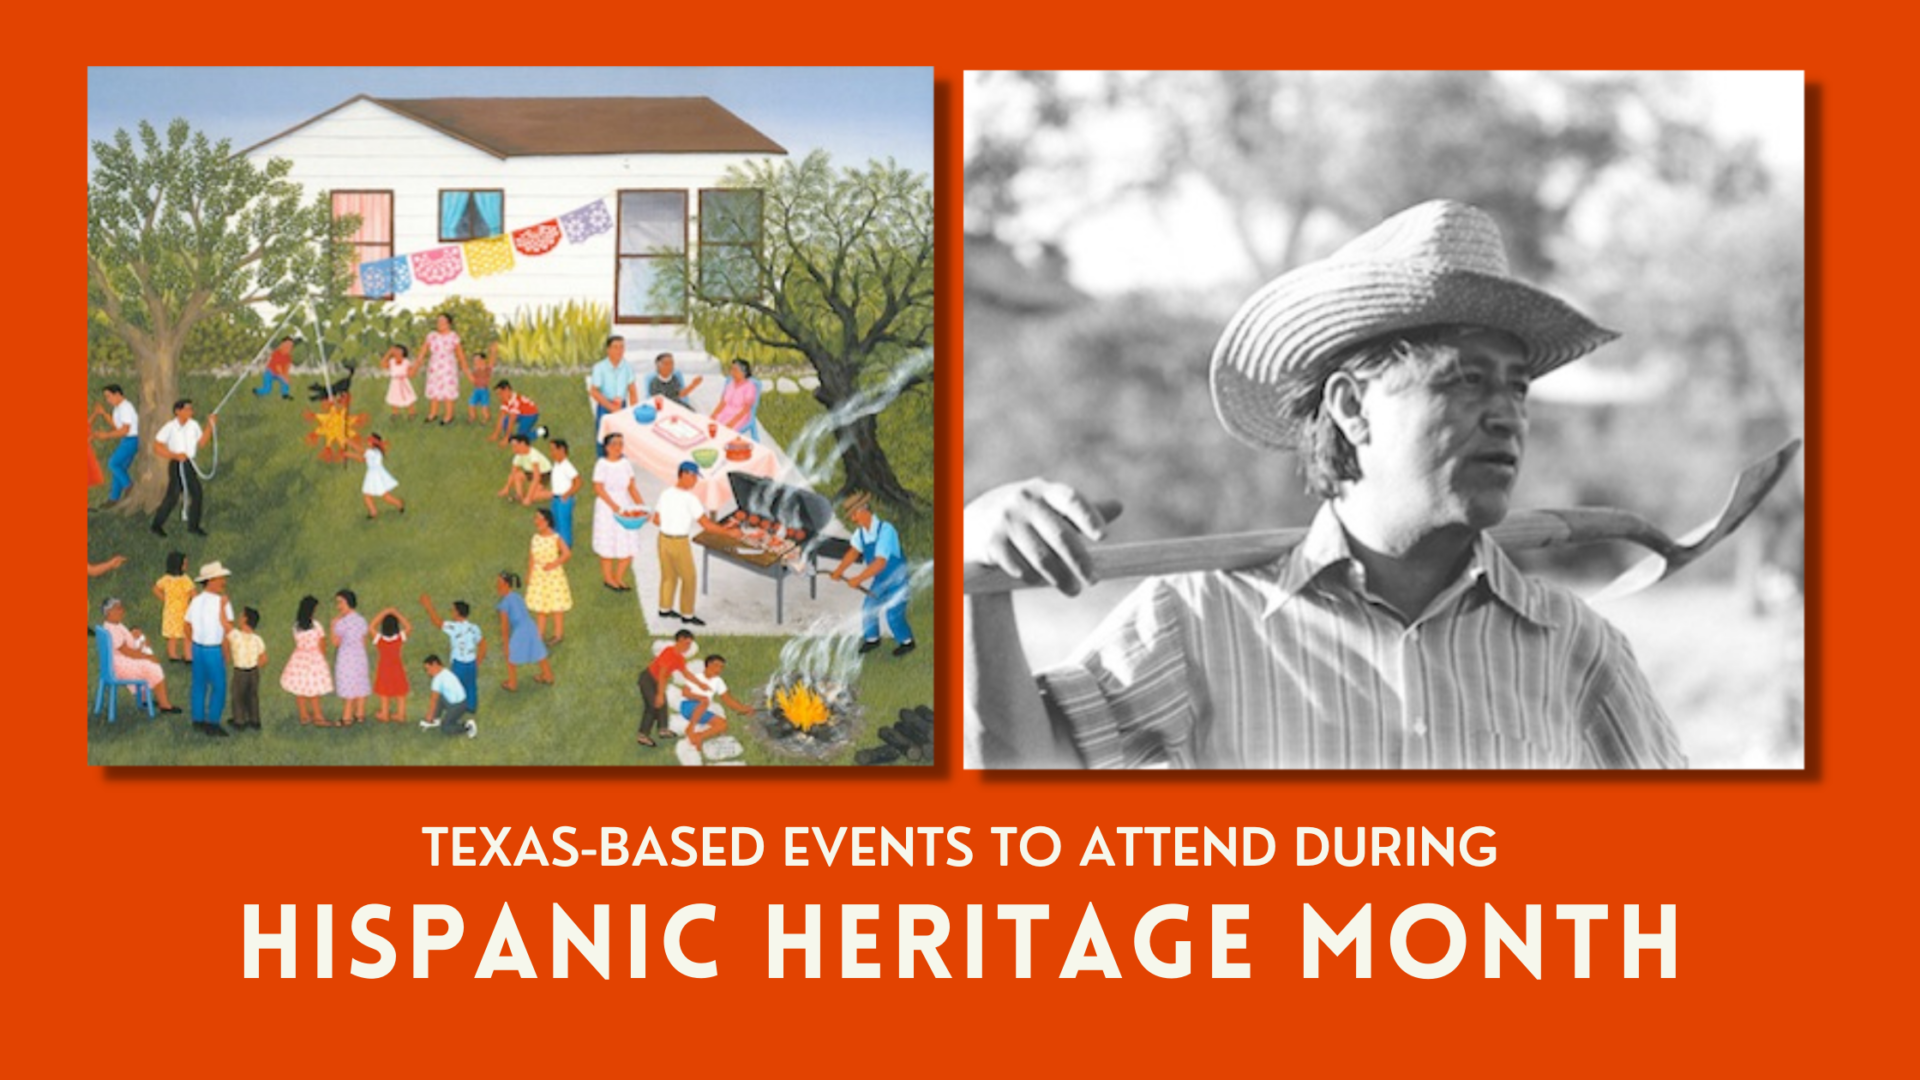 Hispanic Heritage Month Events You Can’t Miss!